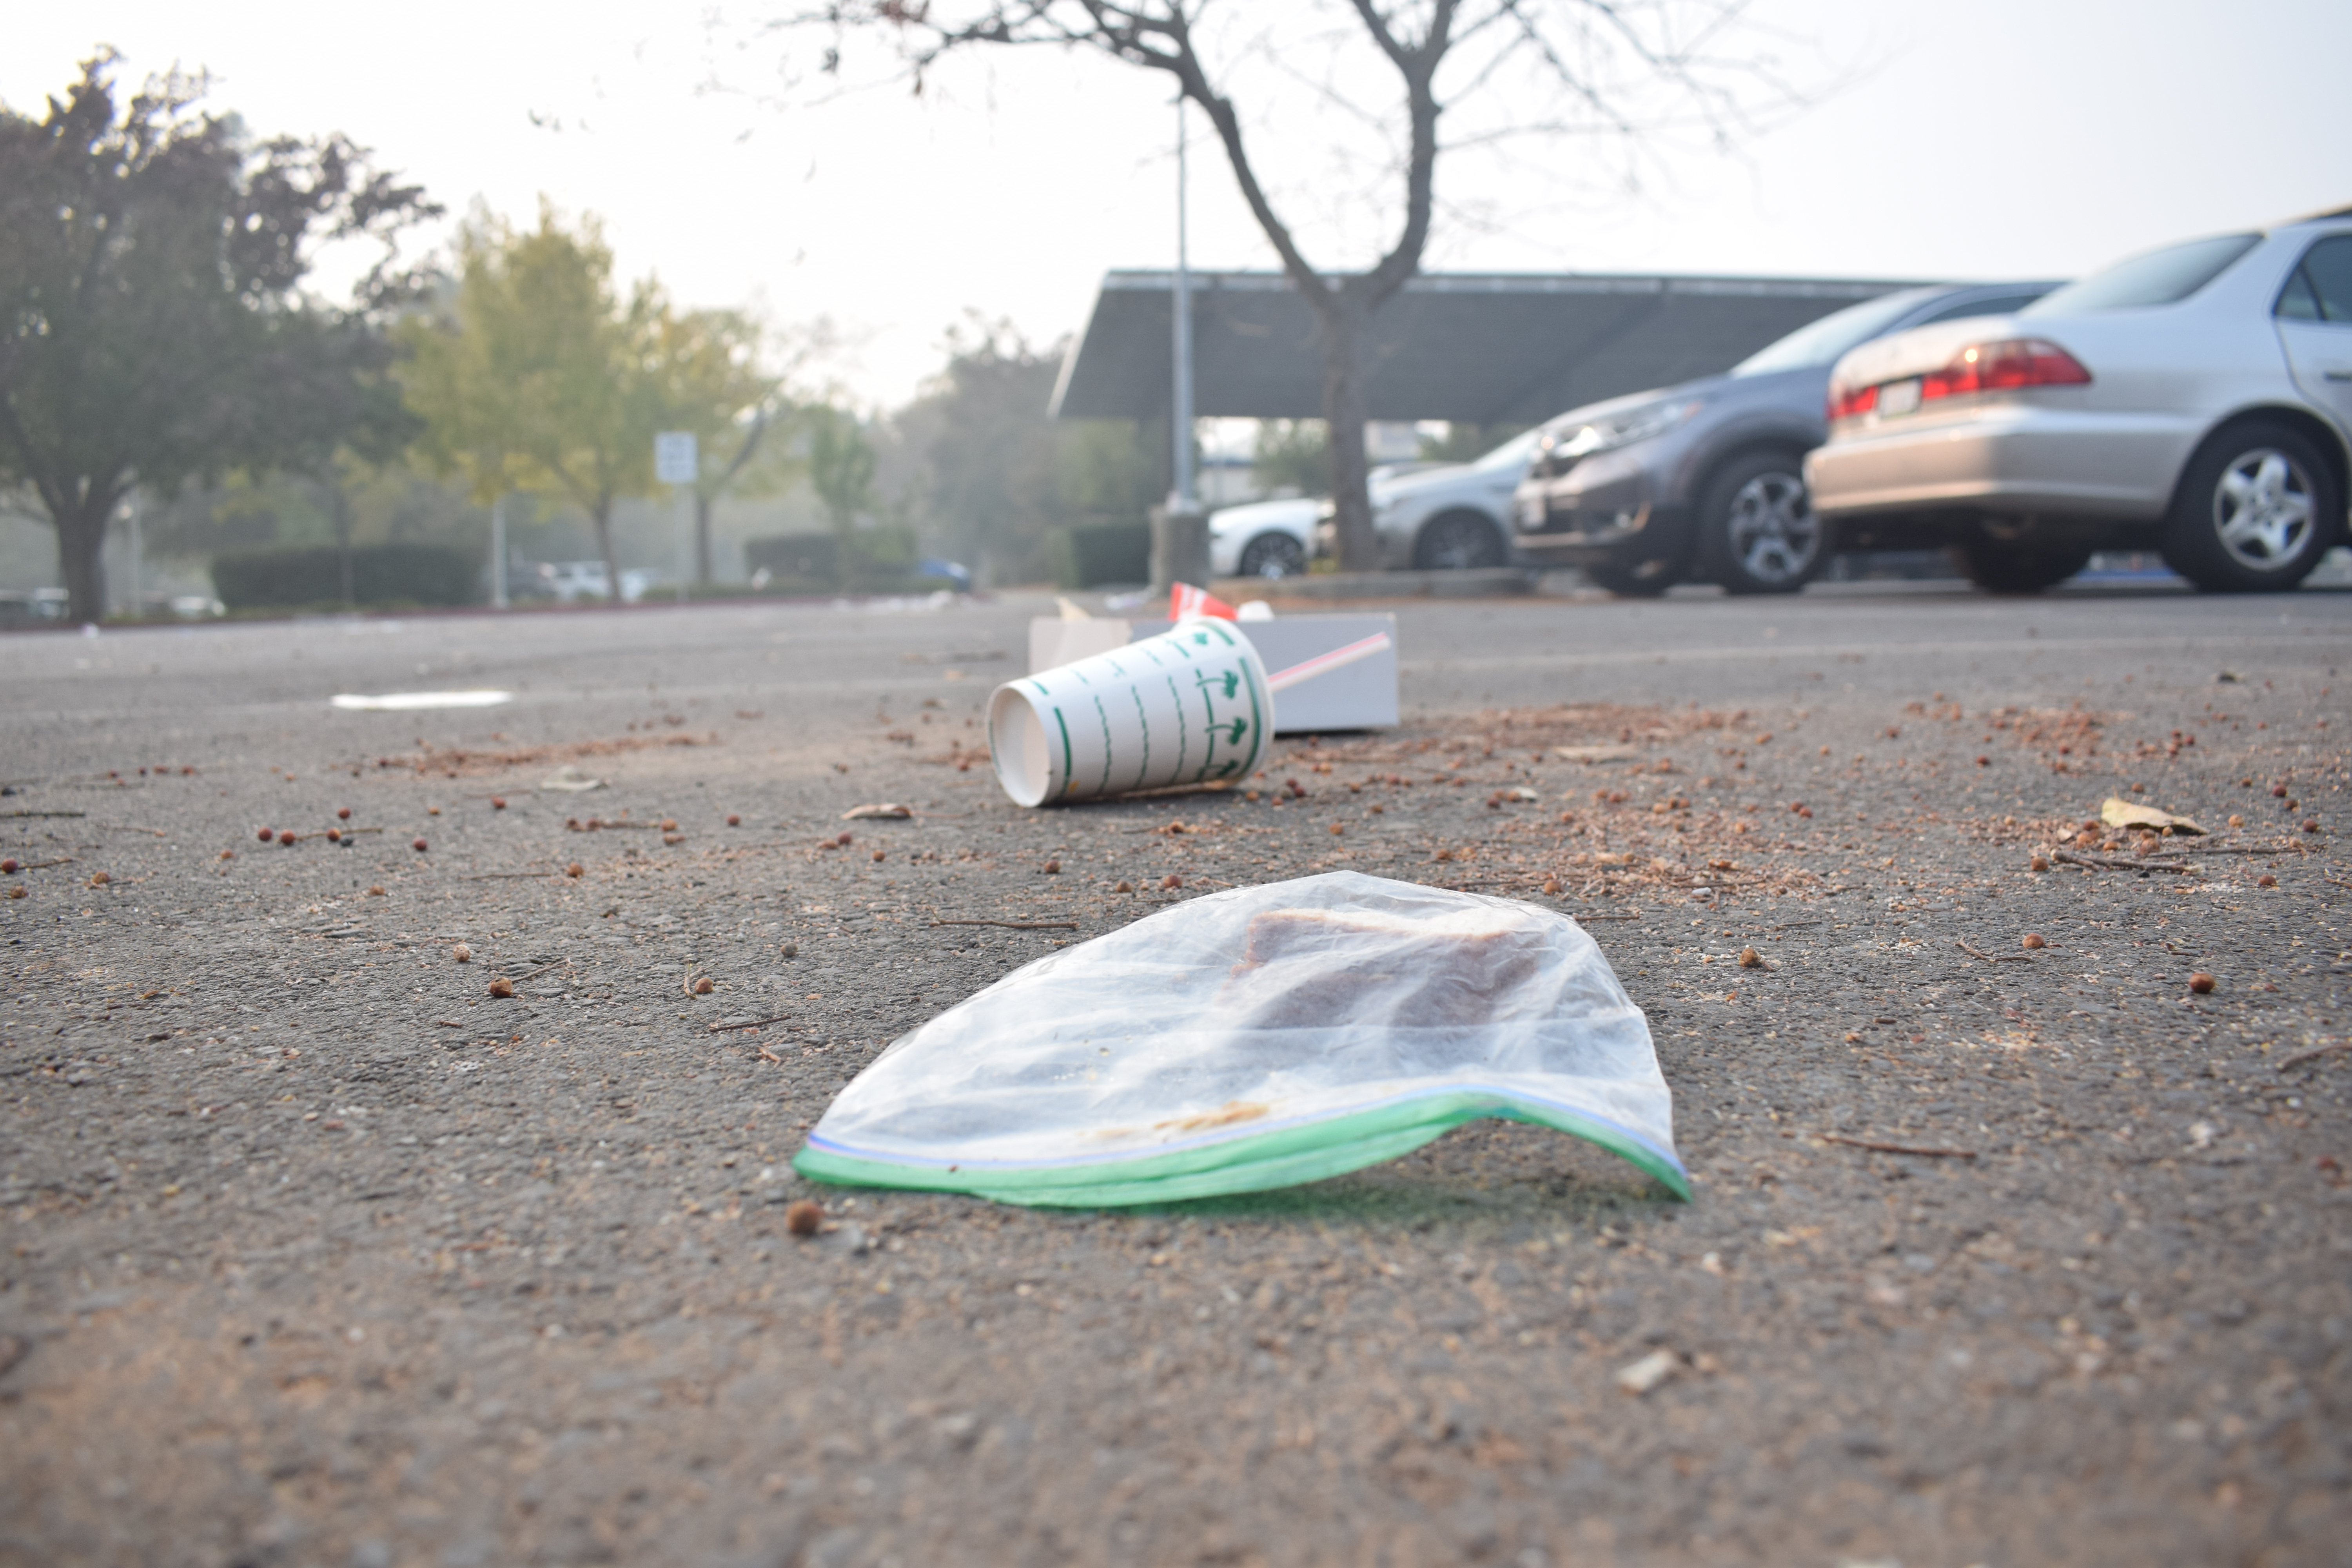 Davis High students must drive over trash such as this half-eaten sandwich in the southmost lane of the parking lot.